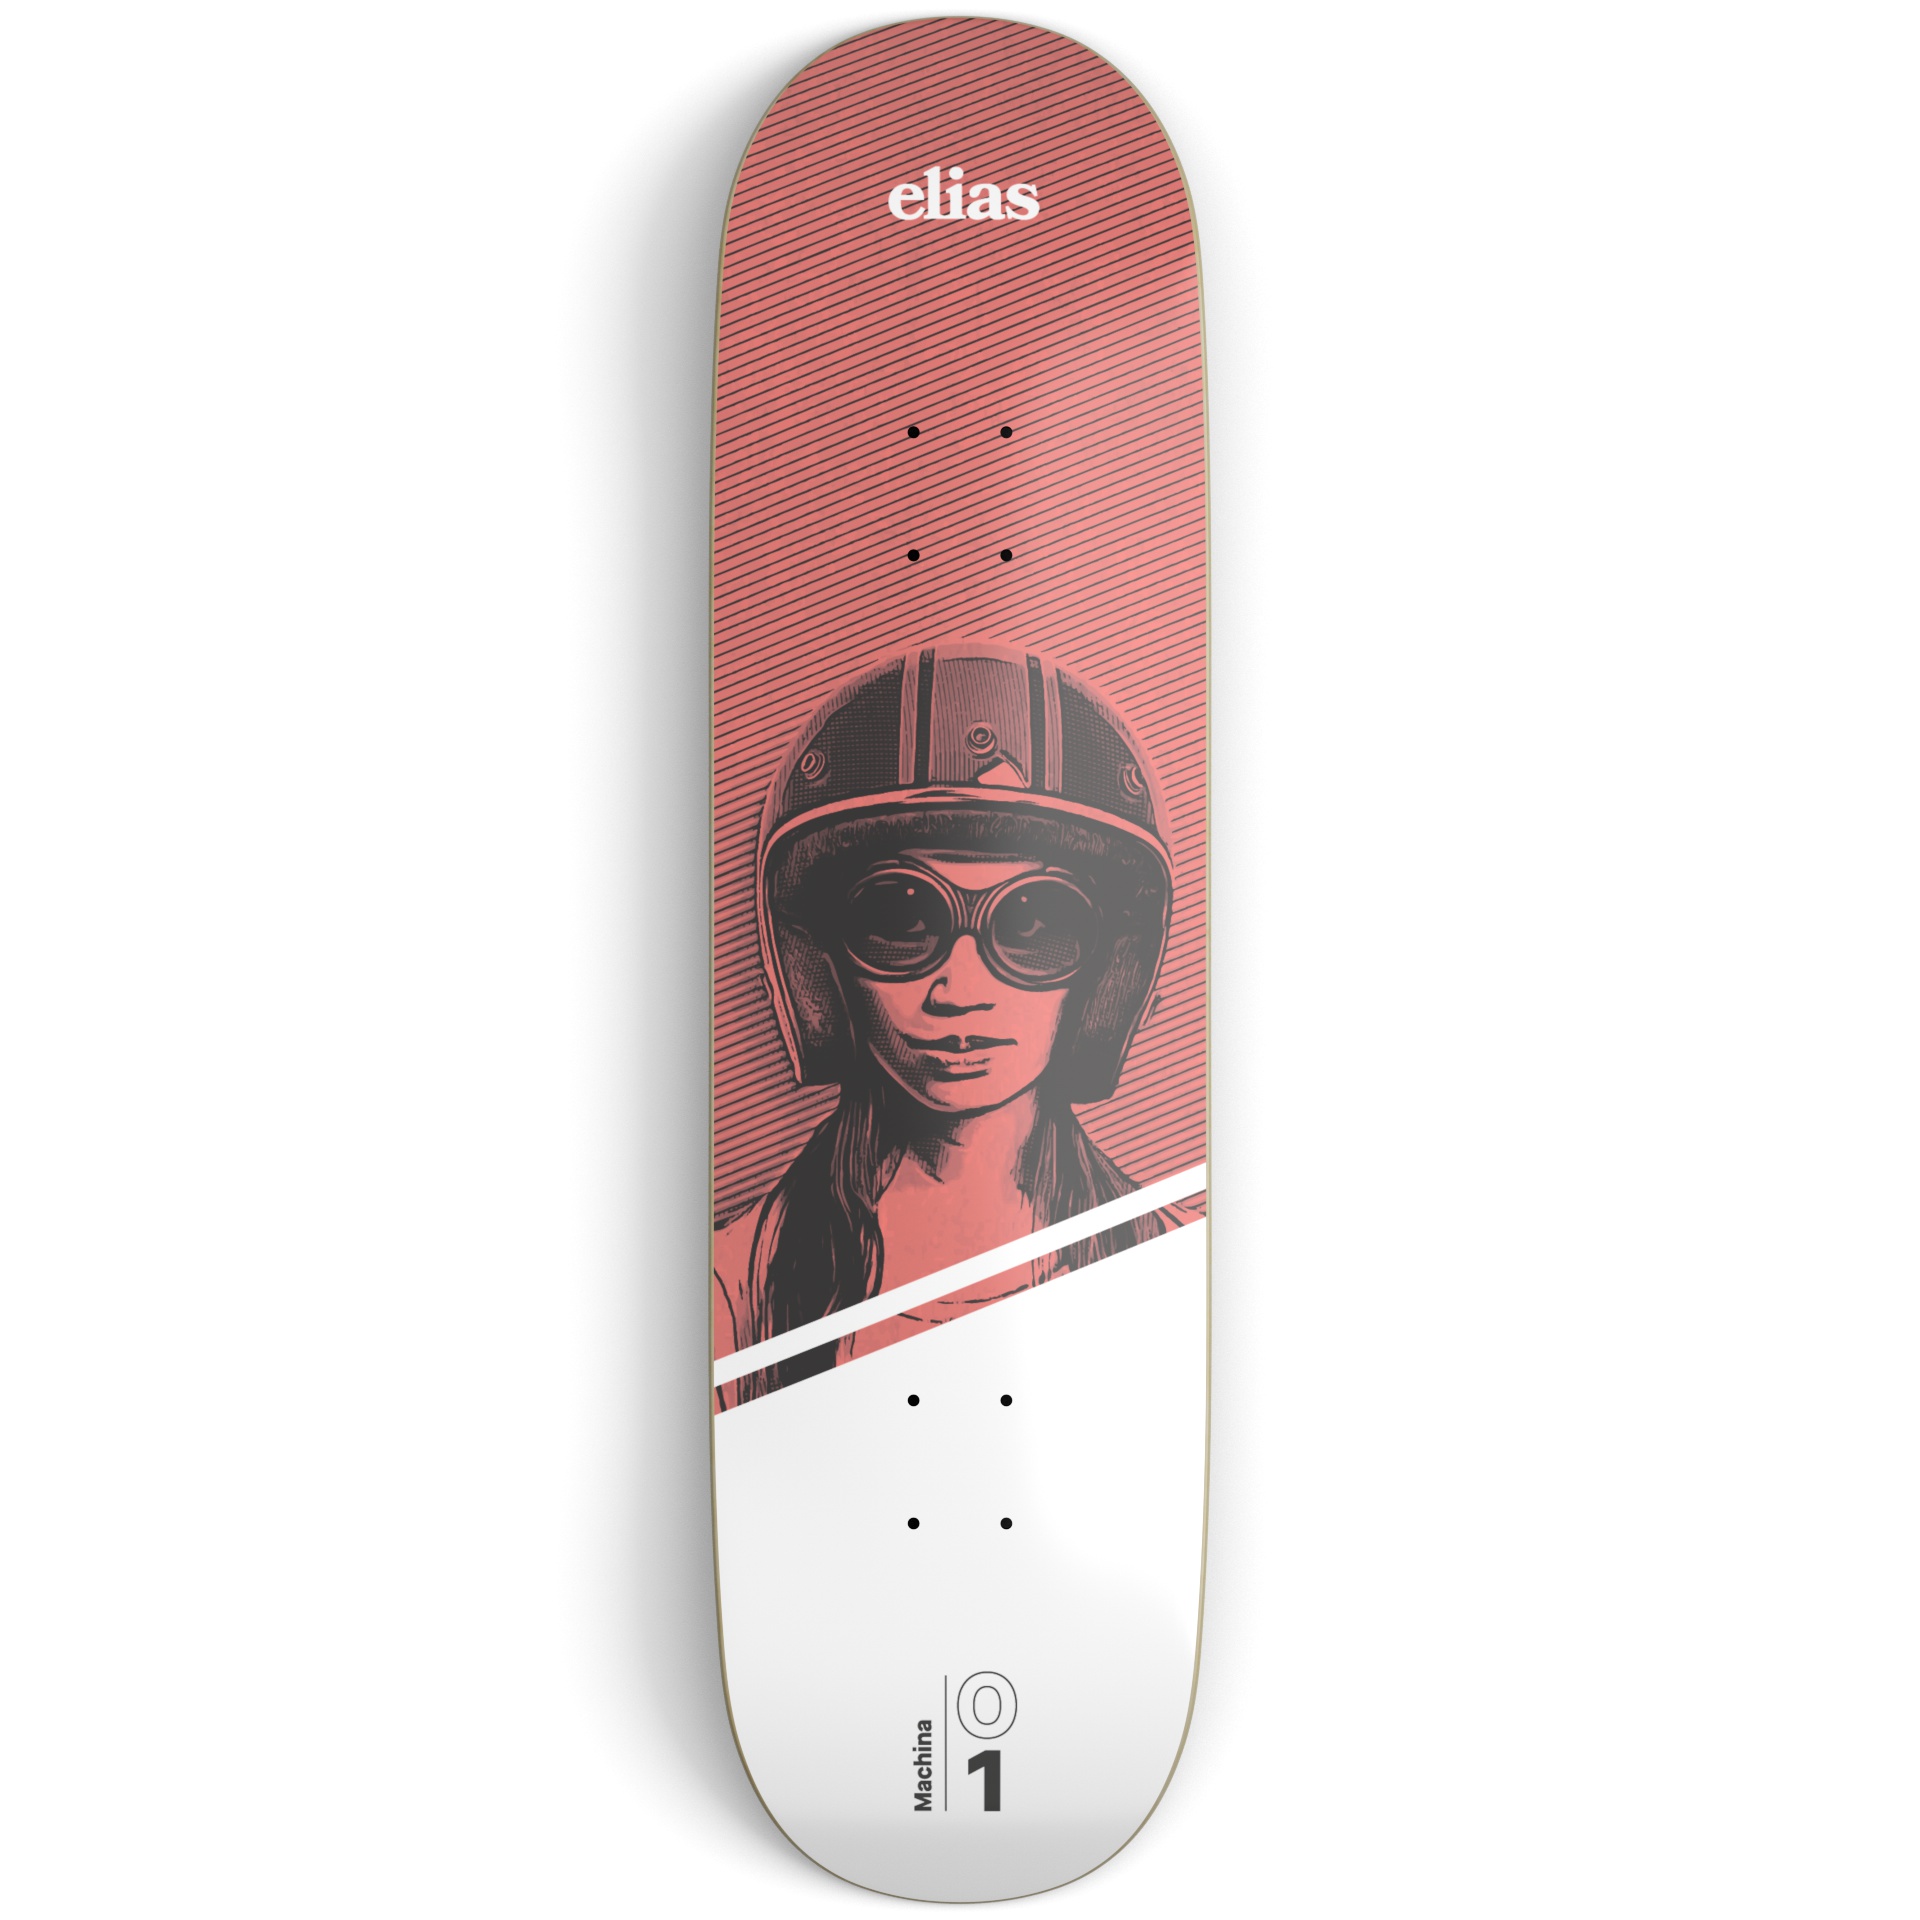 Red and white skateboard deck on a light grey surface printed with an illustration of a girl wearing a motorcycle helmet and white and black text